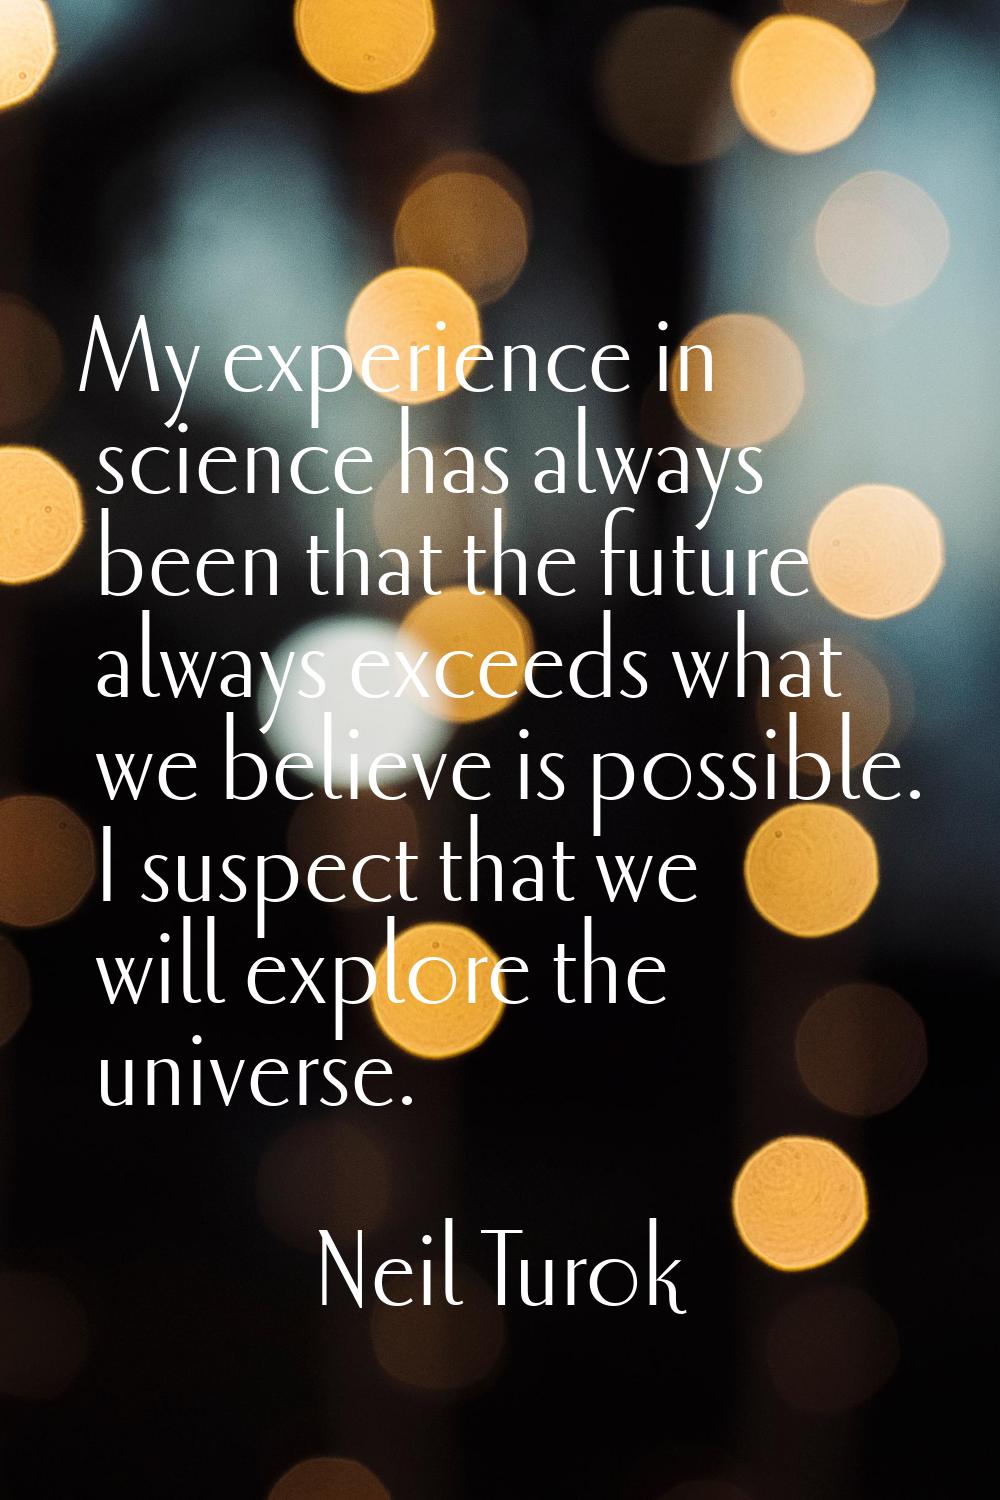 My experience in science has always been that the future always exceeds what we believe is possible